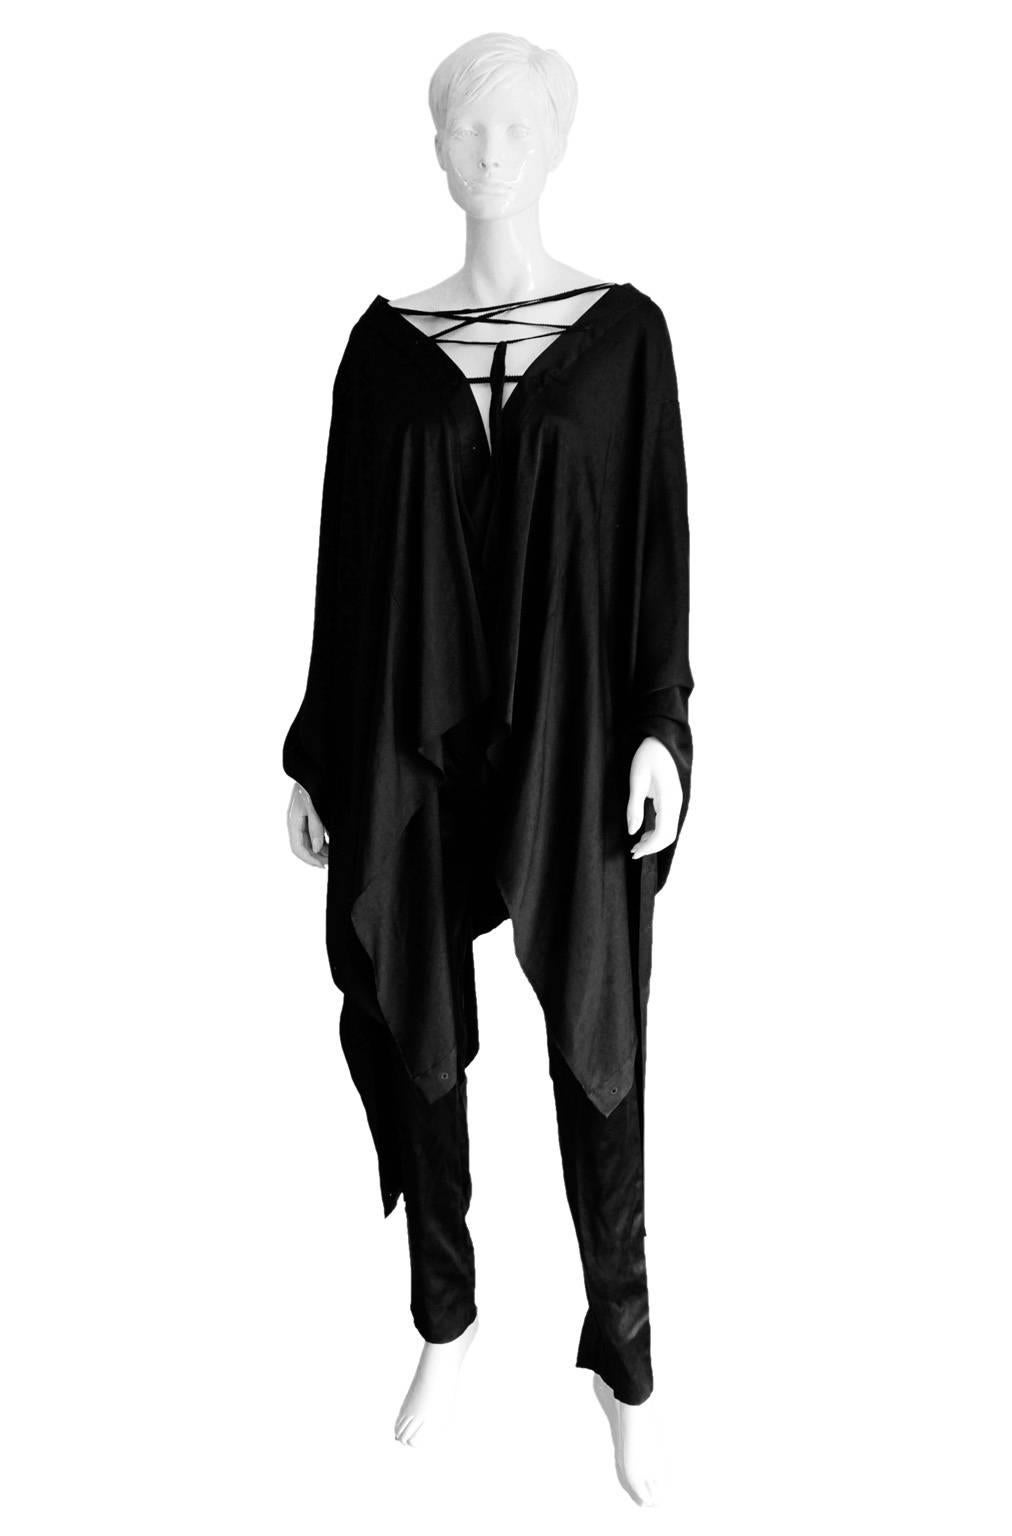 That Amazing Tom Ford For Gucci Fall Winter 2002 Black Silk Gothic Poncho & Pants In Italian Size 42!

This set has only been worn a handful of times & is in very good condition with only minimal signs of wear throughout... an absolute must for